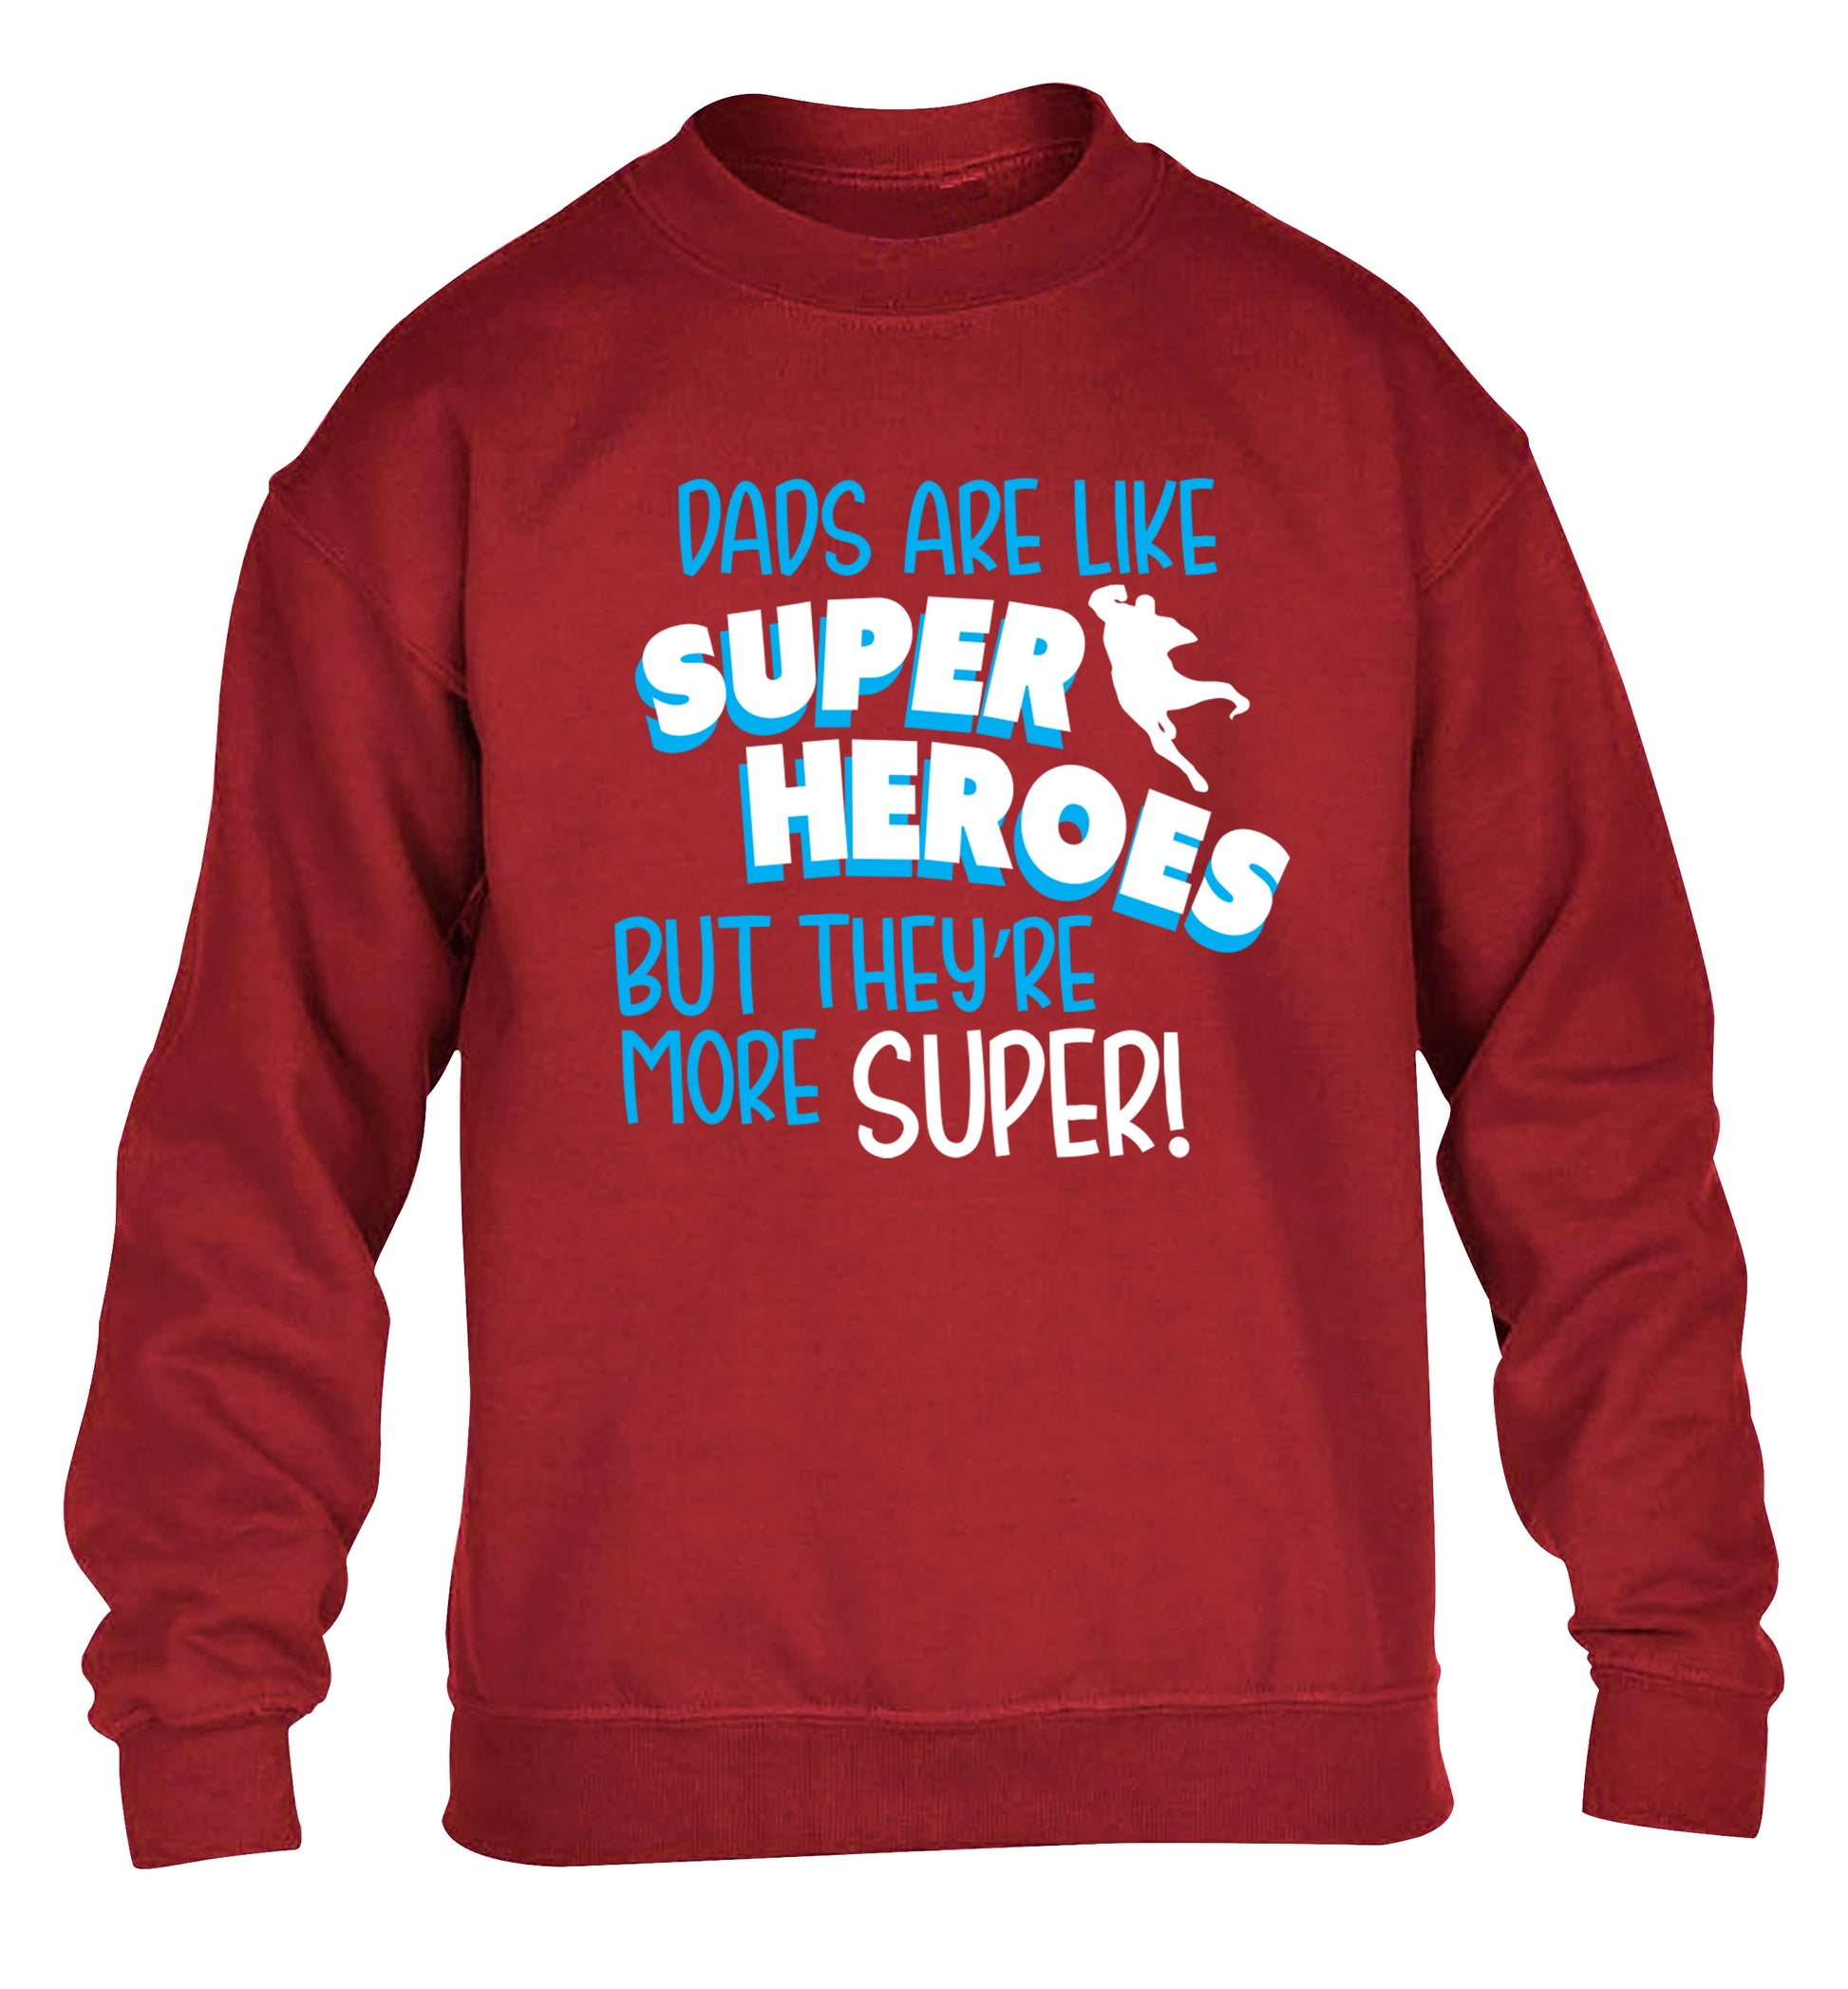 Dads are like superheros but they're more super children's grey sweater 12-13 Years